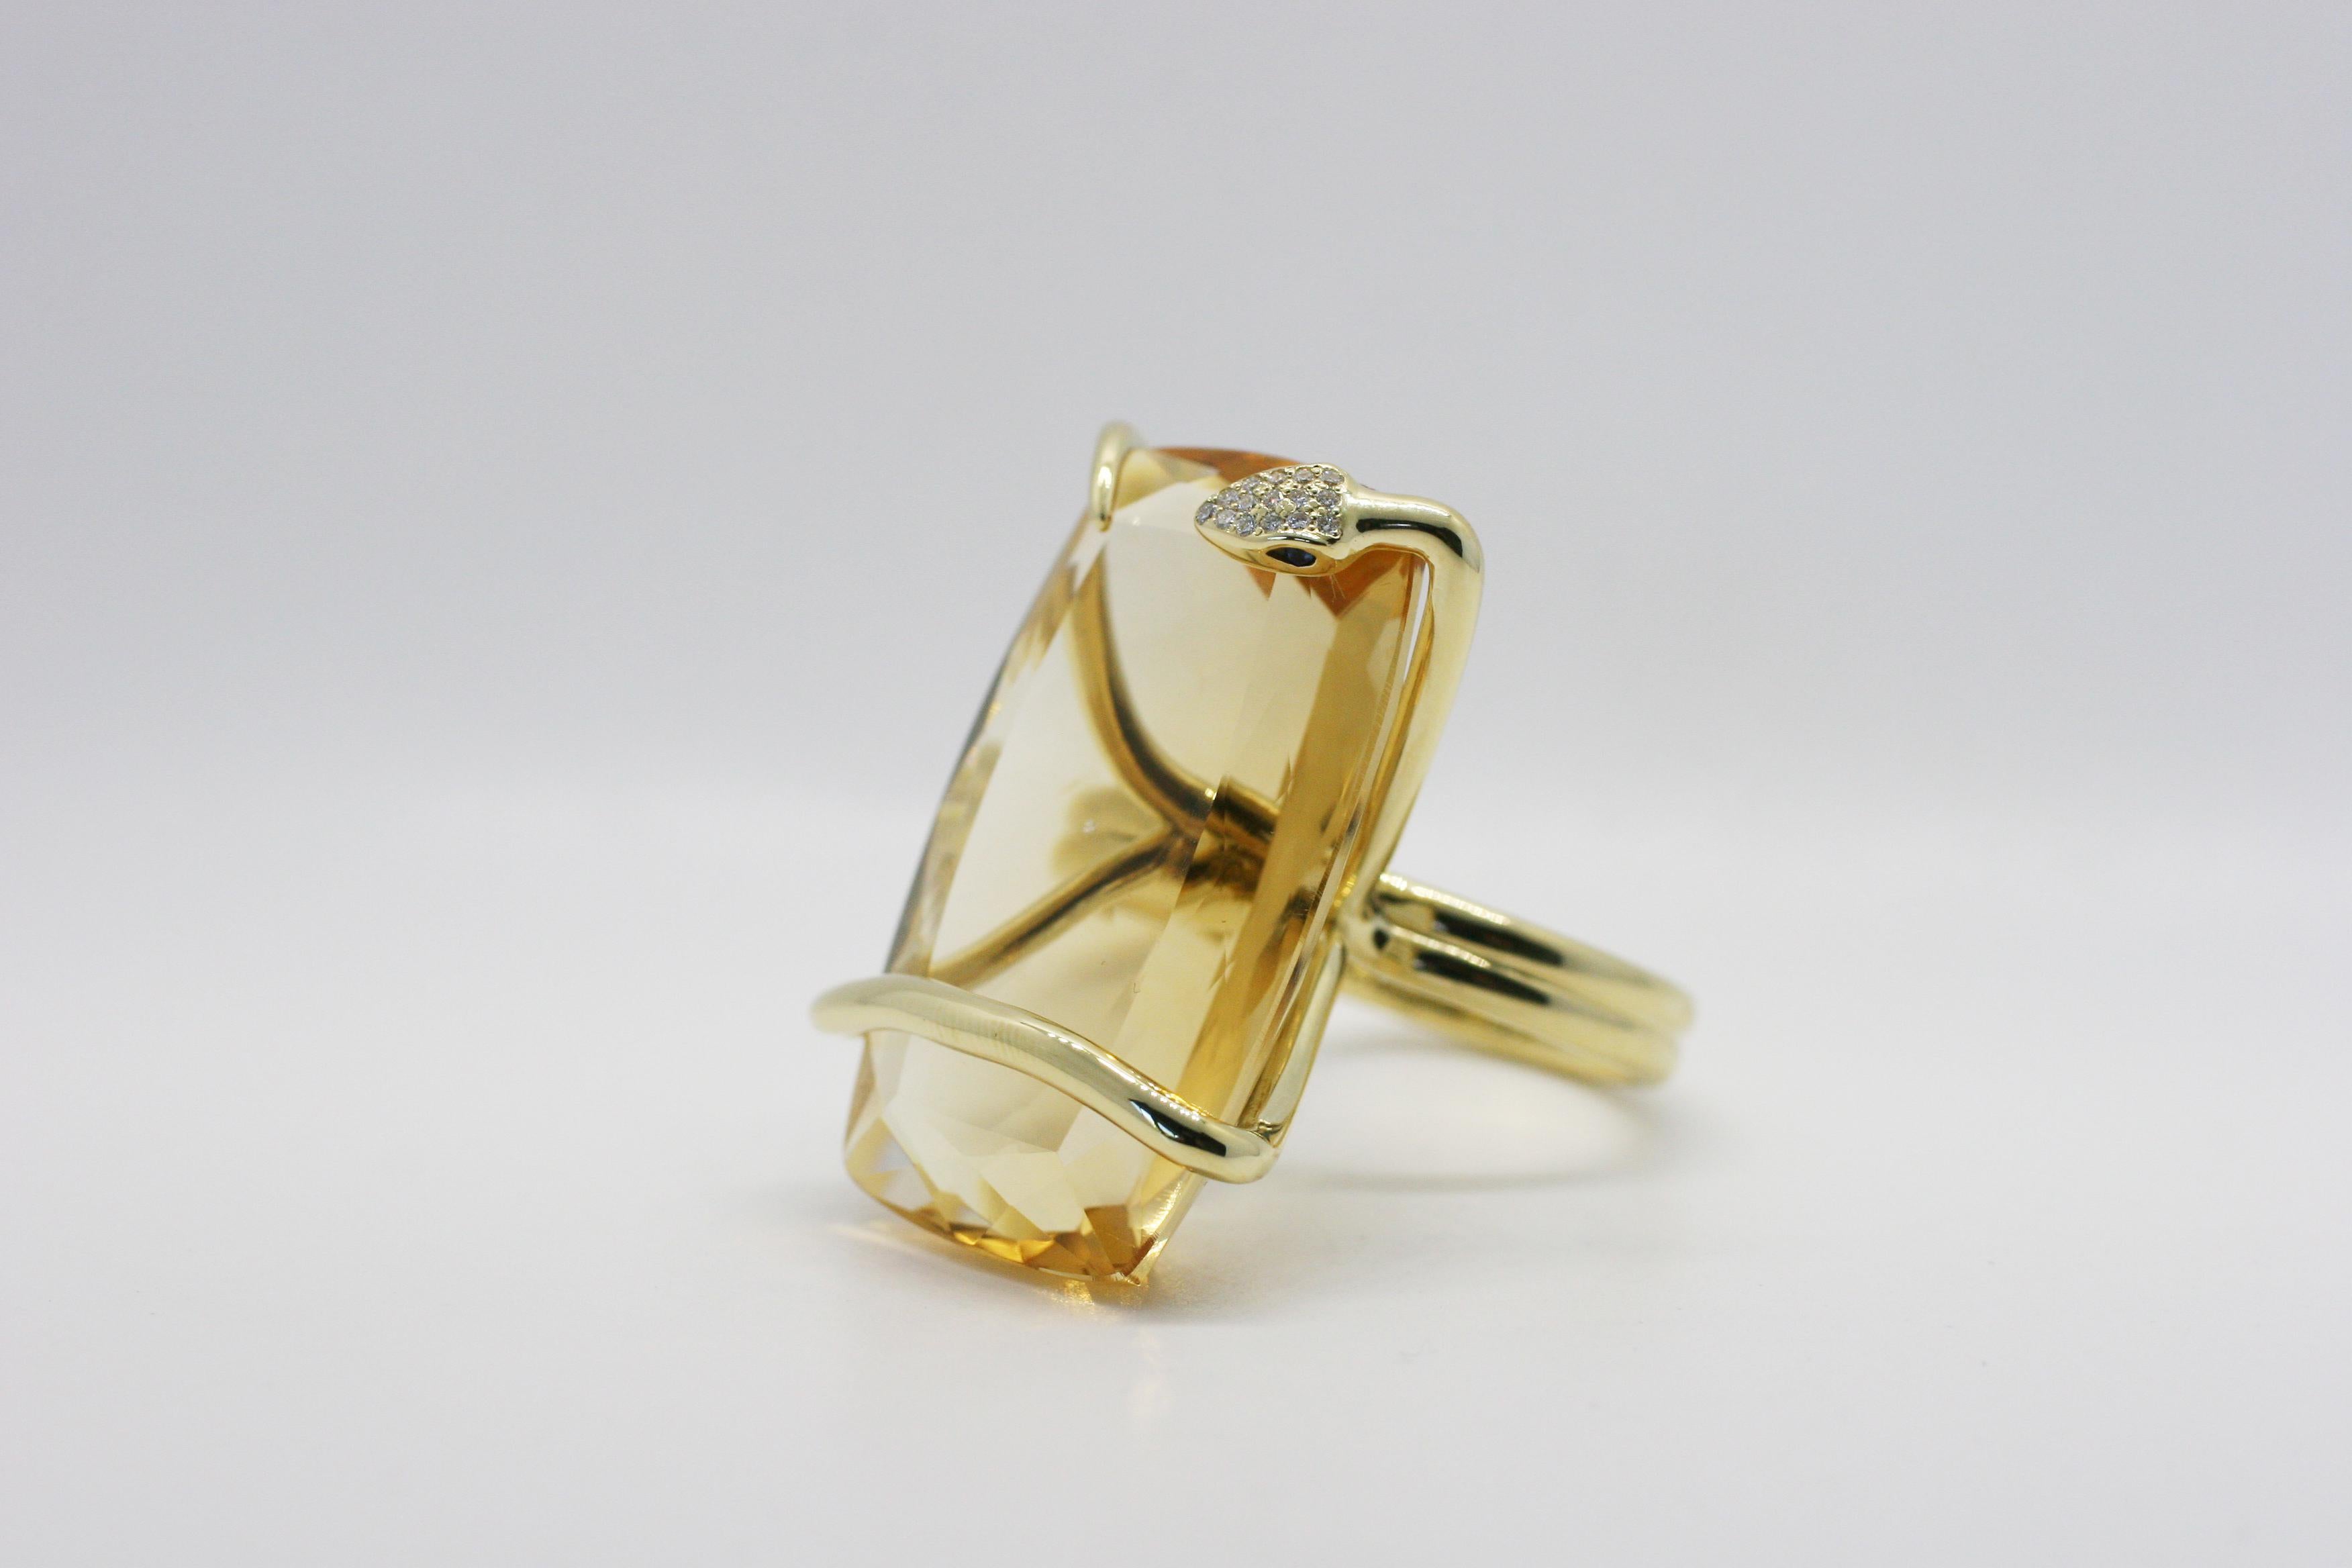 18k Yellow Gold Citrine Climbing Snake Ring features Perez Bitan's signature curved snake with blue sapphire eyes and white diamond micro pave head that wraps around the finger and sets the cushion cut large natural citrine in place 
18k Yellow